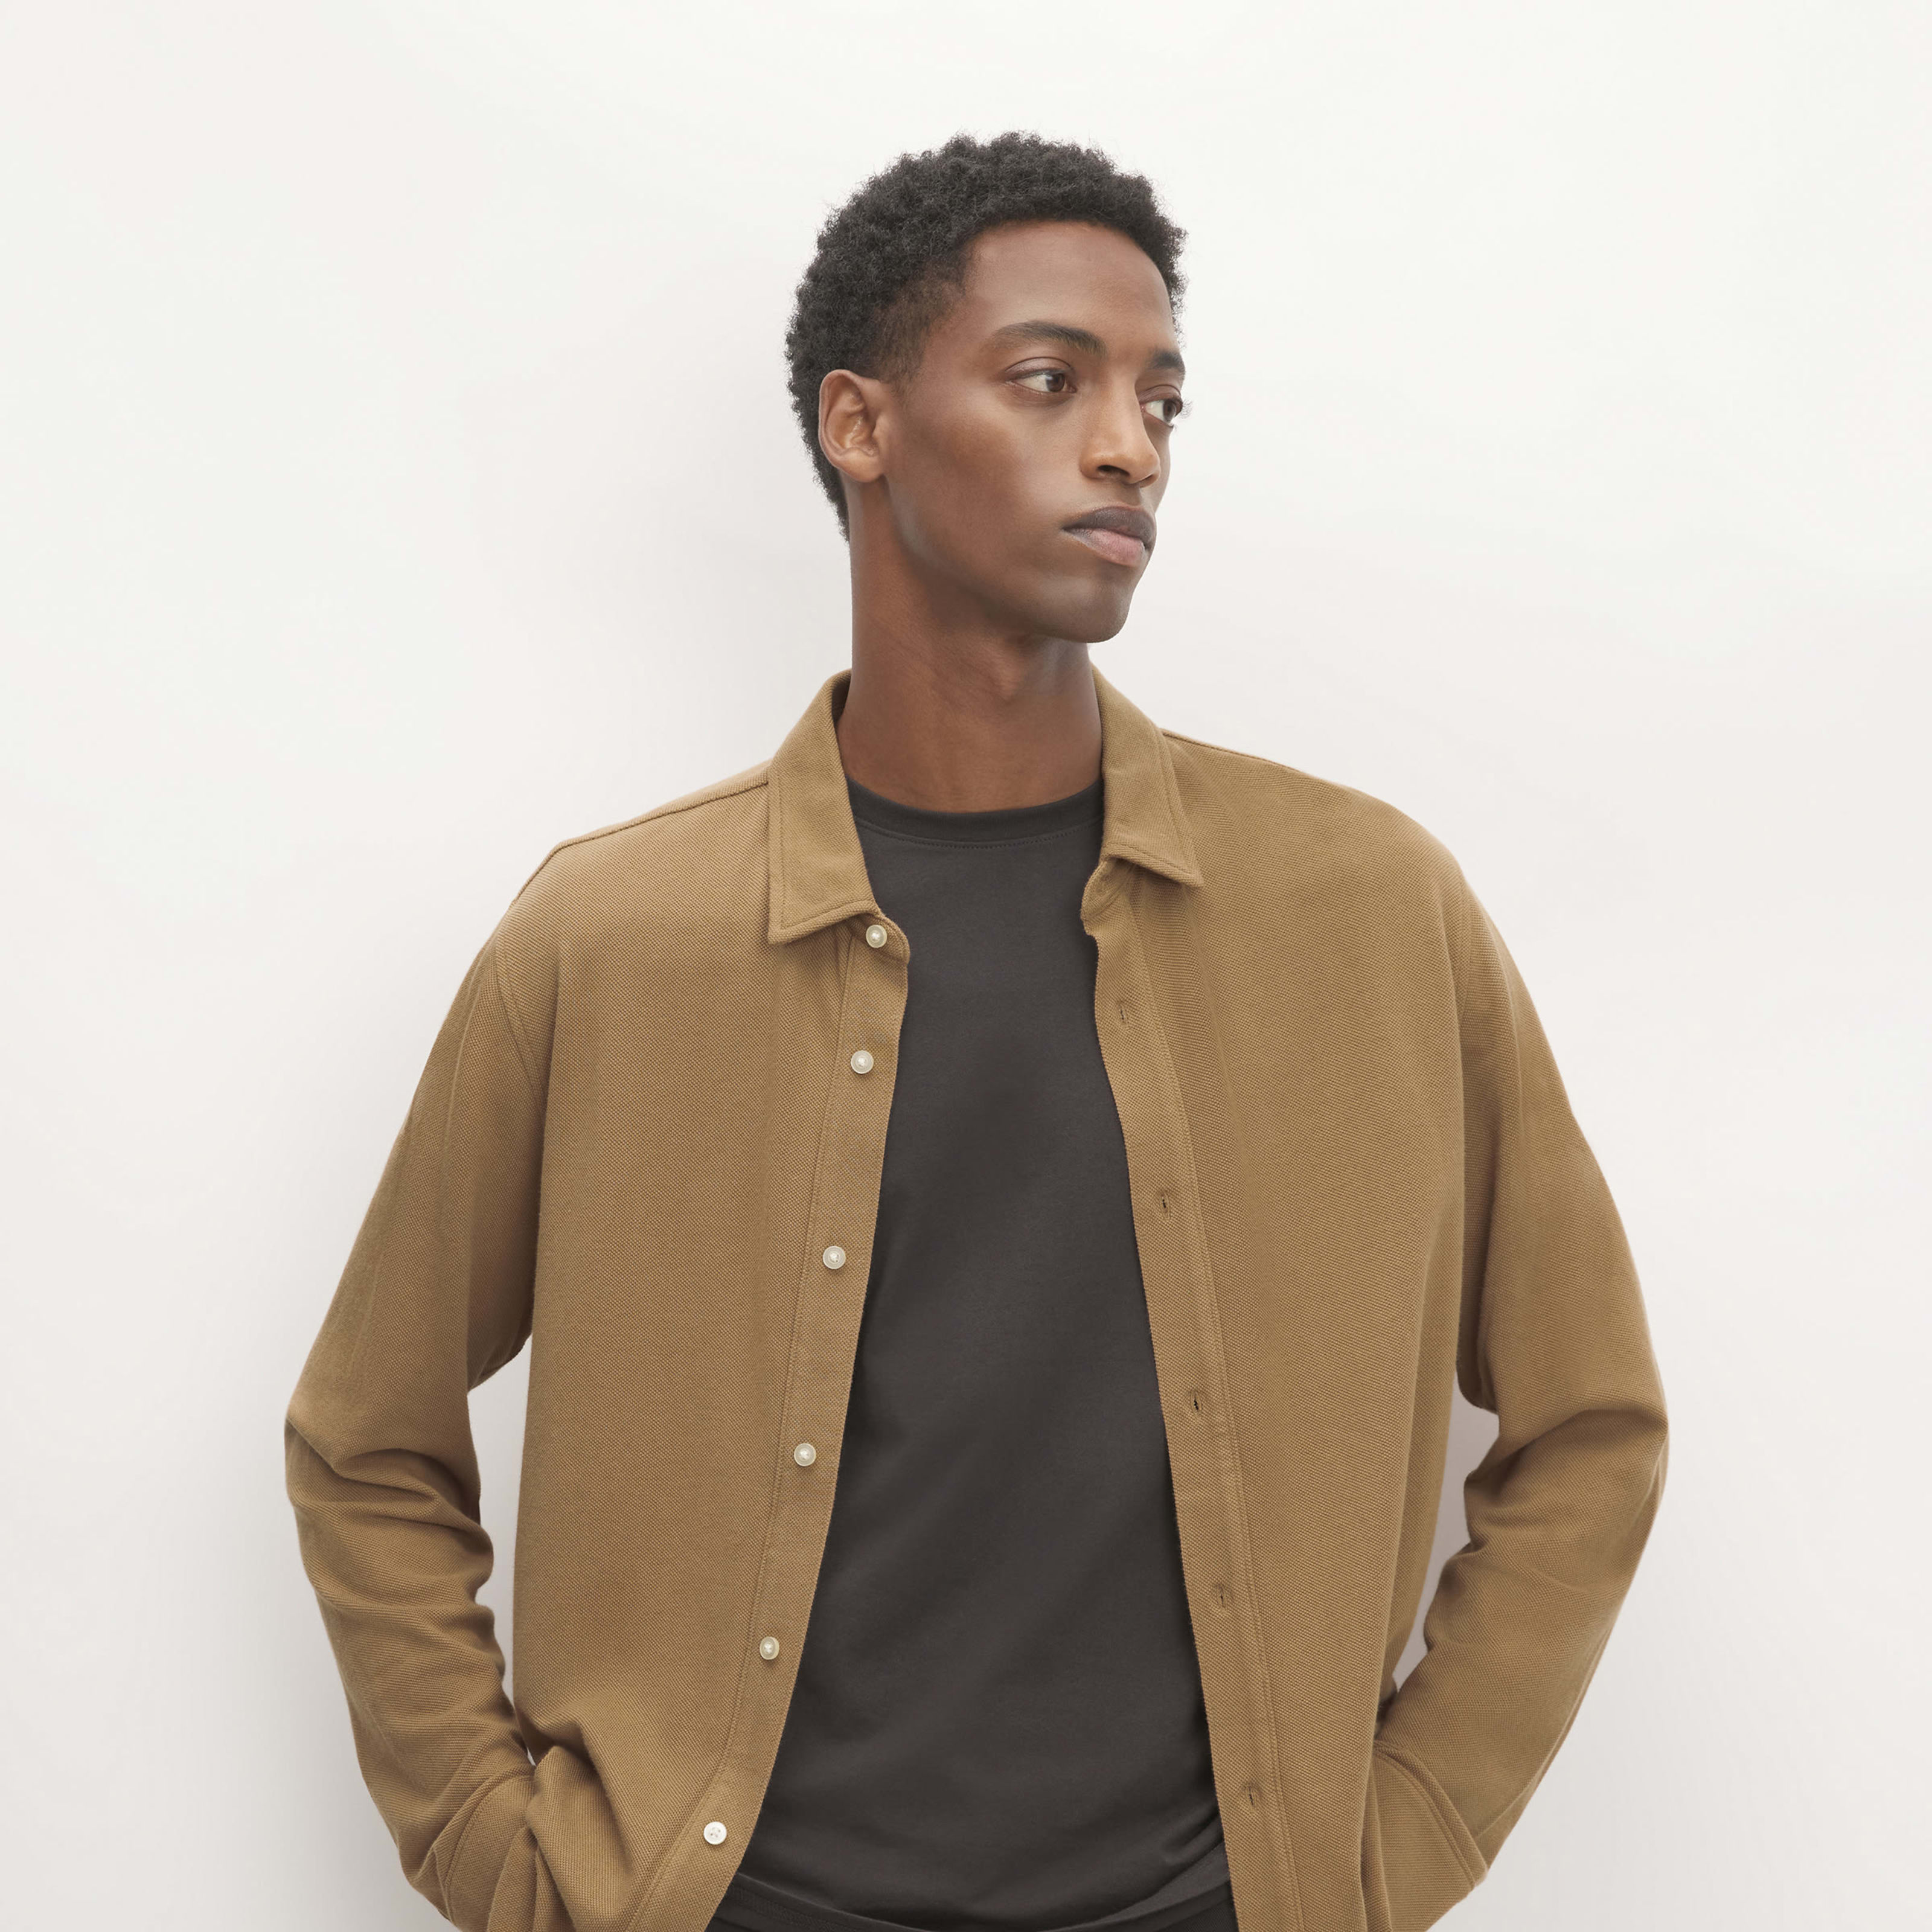 men's long-sleeve pique shirt by everlane in light brown, size xs